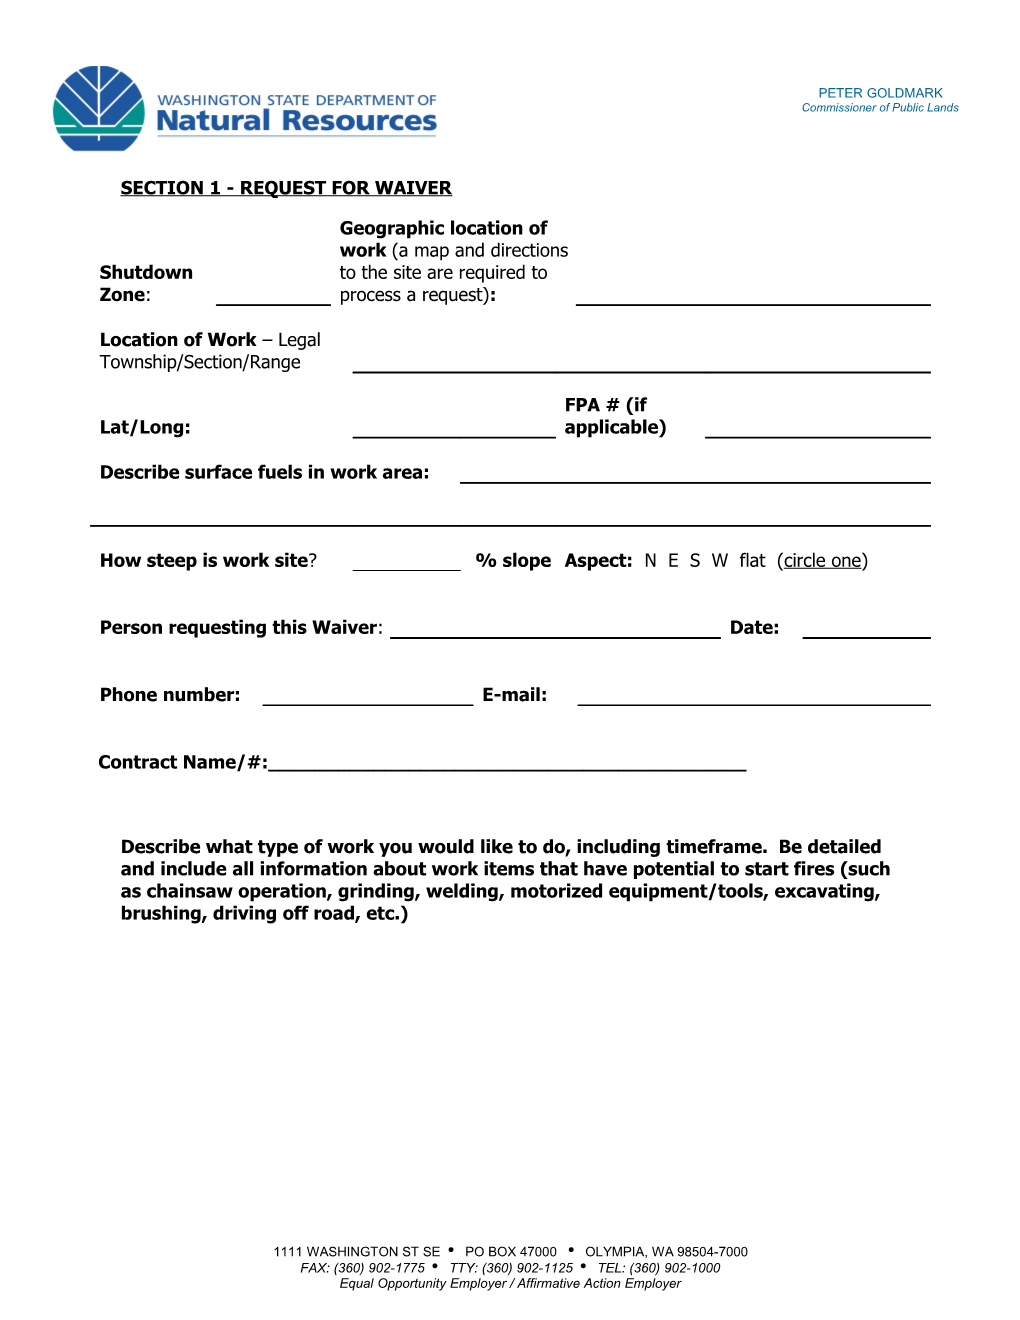 Section 1 - Request for Waiver